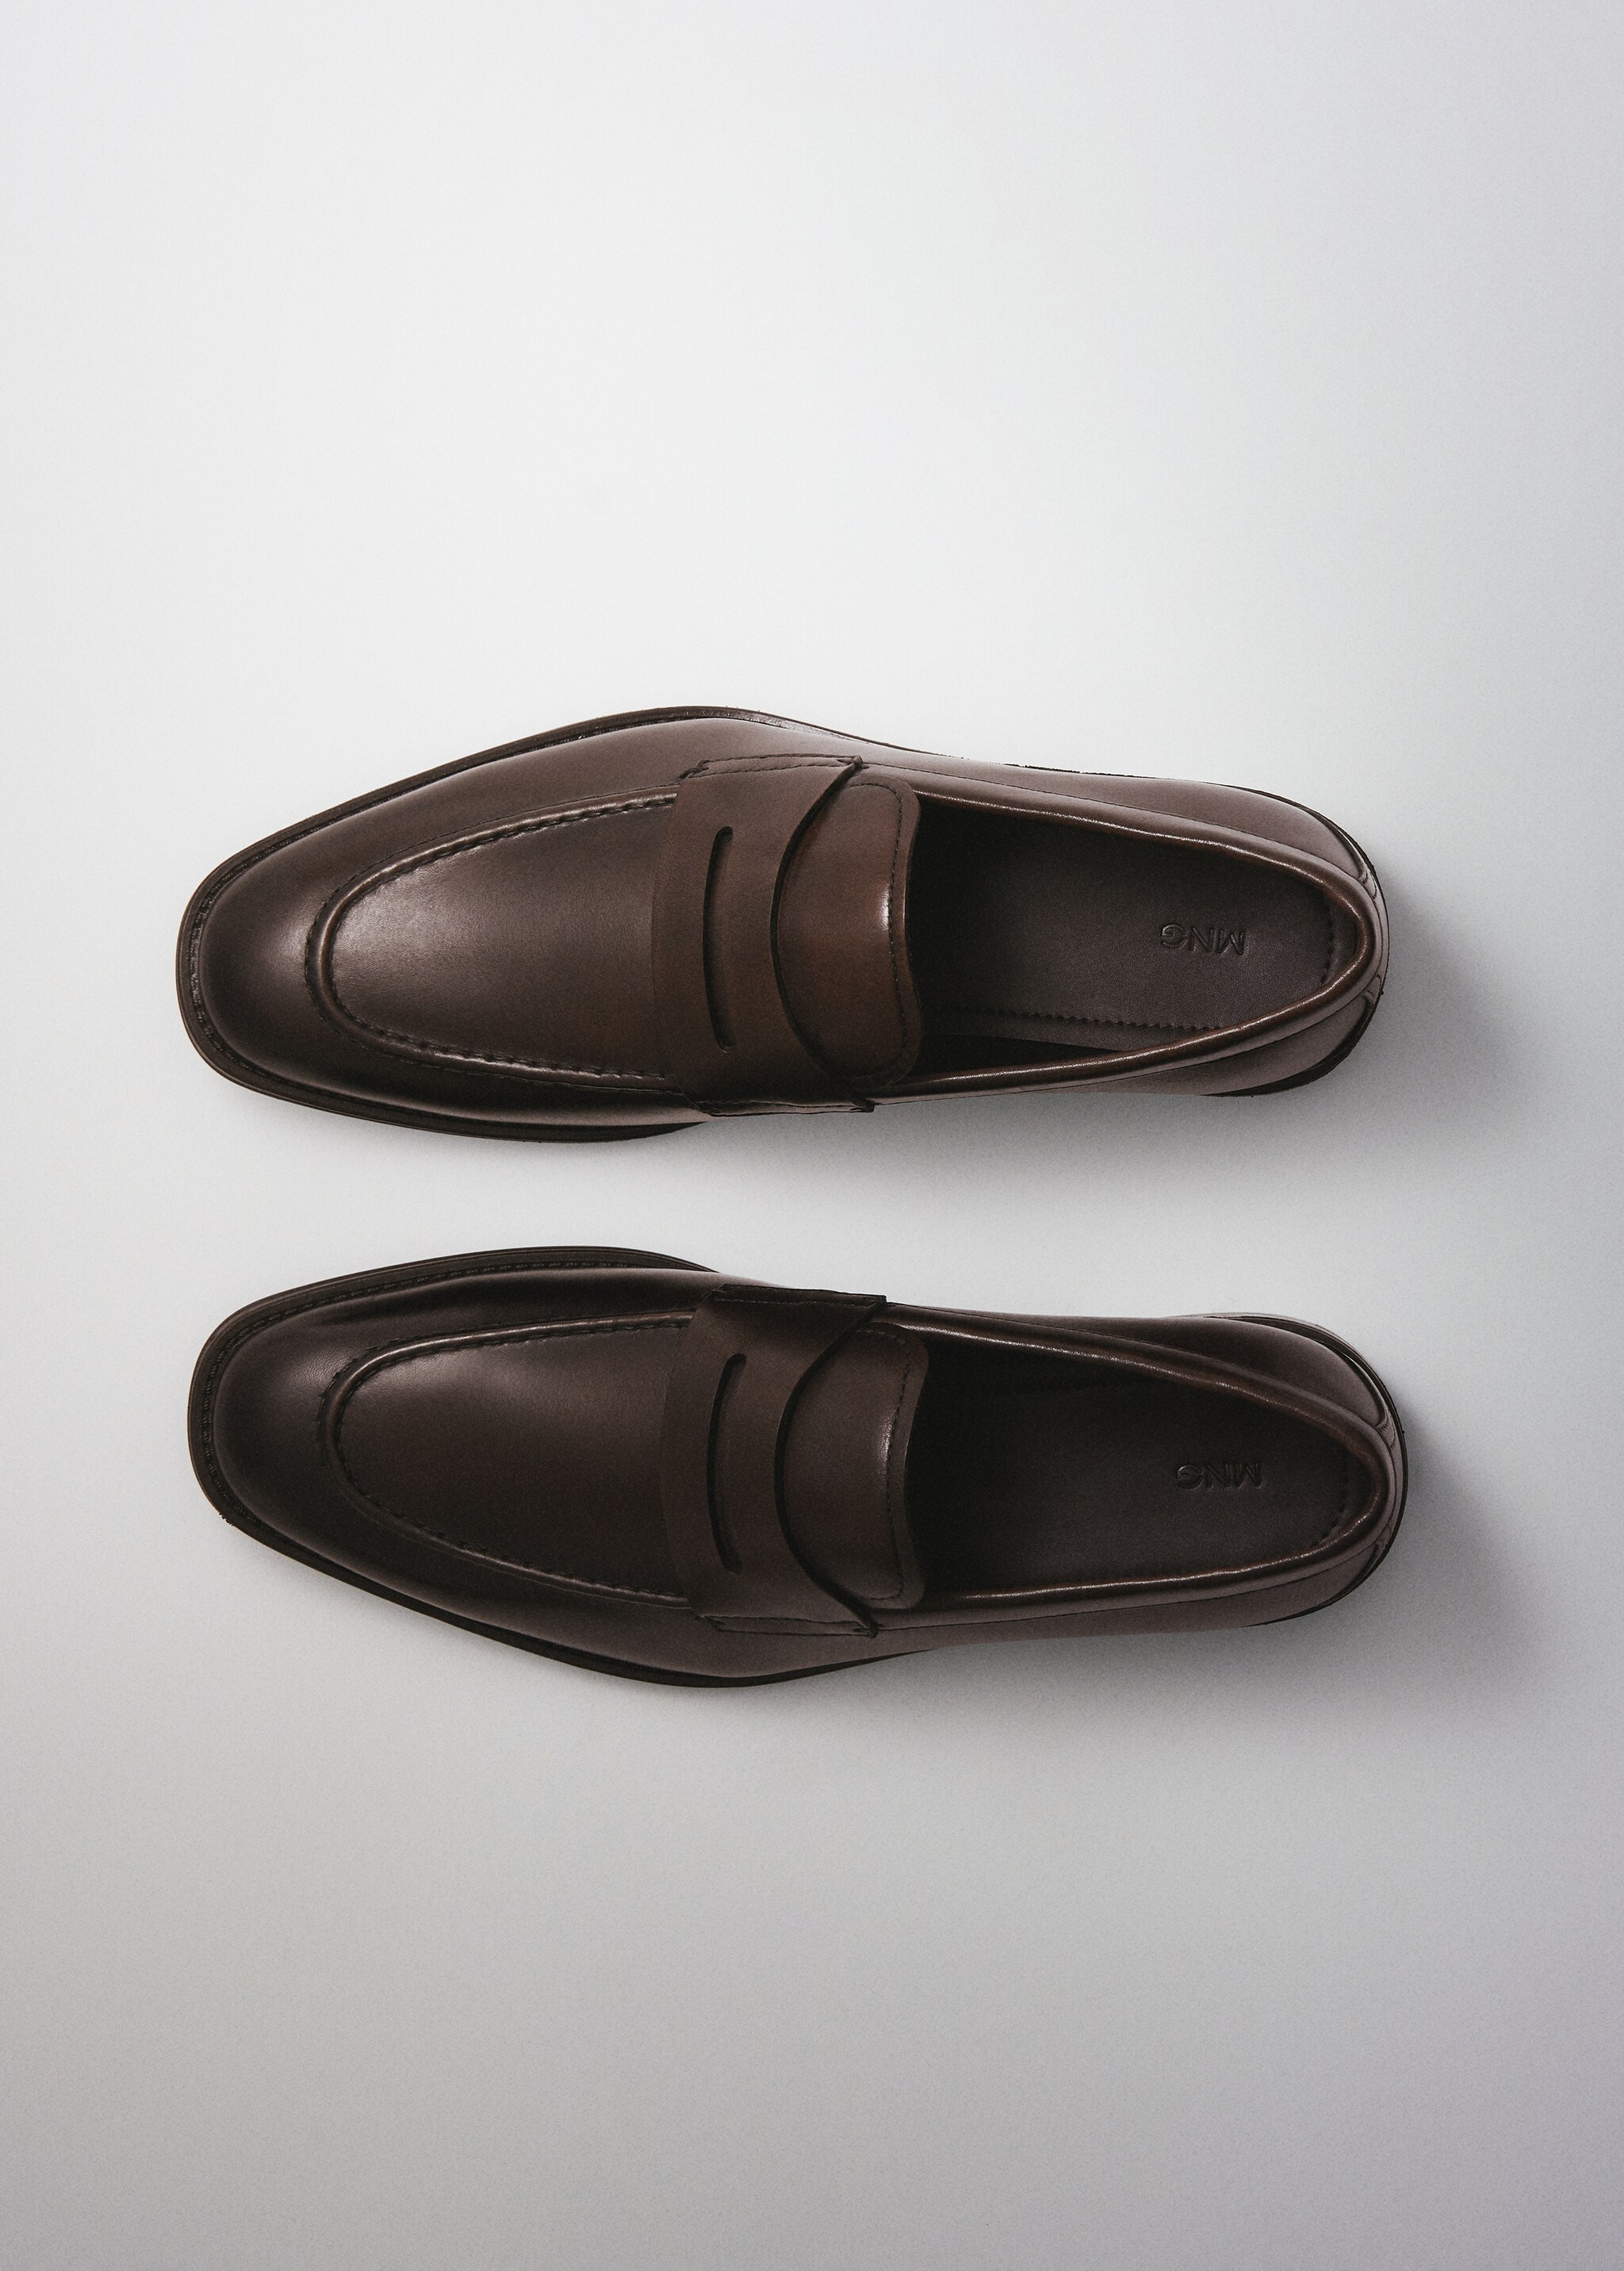 Aged-leather loafers - Details of the article 9